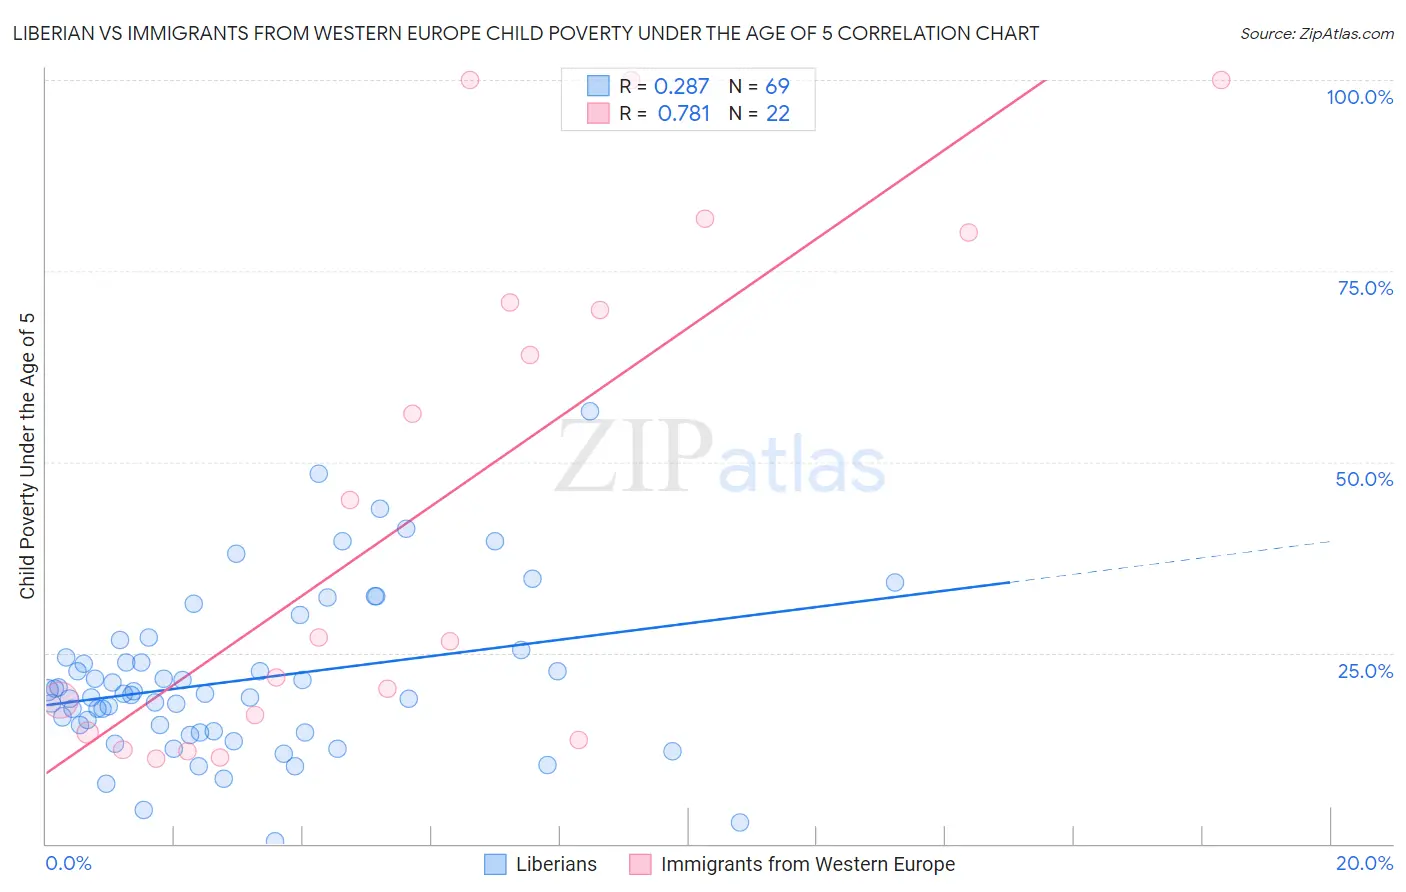 Liberian vs Immigrants from Western Europe Child Poverty Under the Age of 5